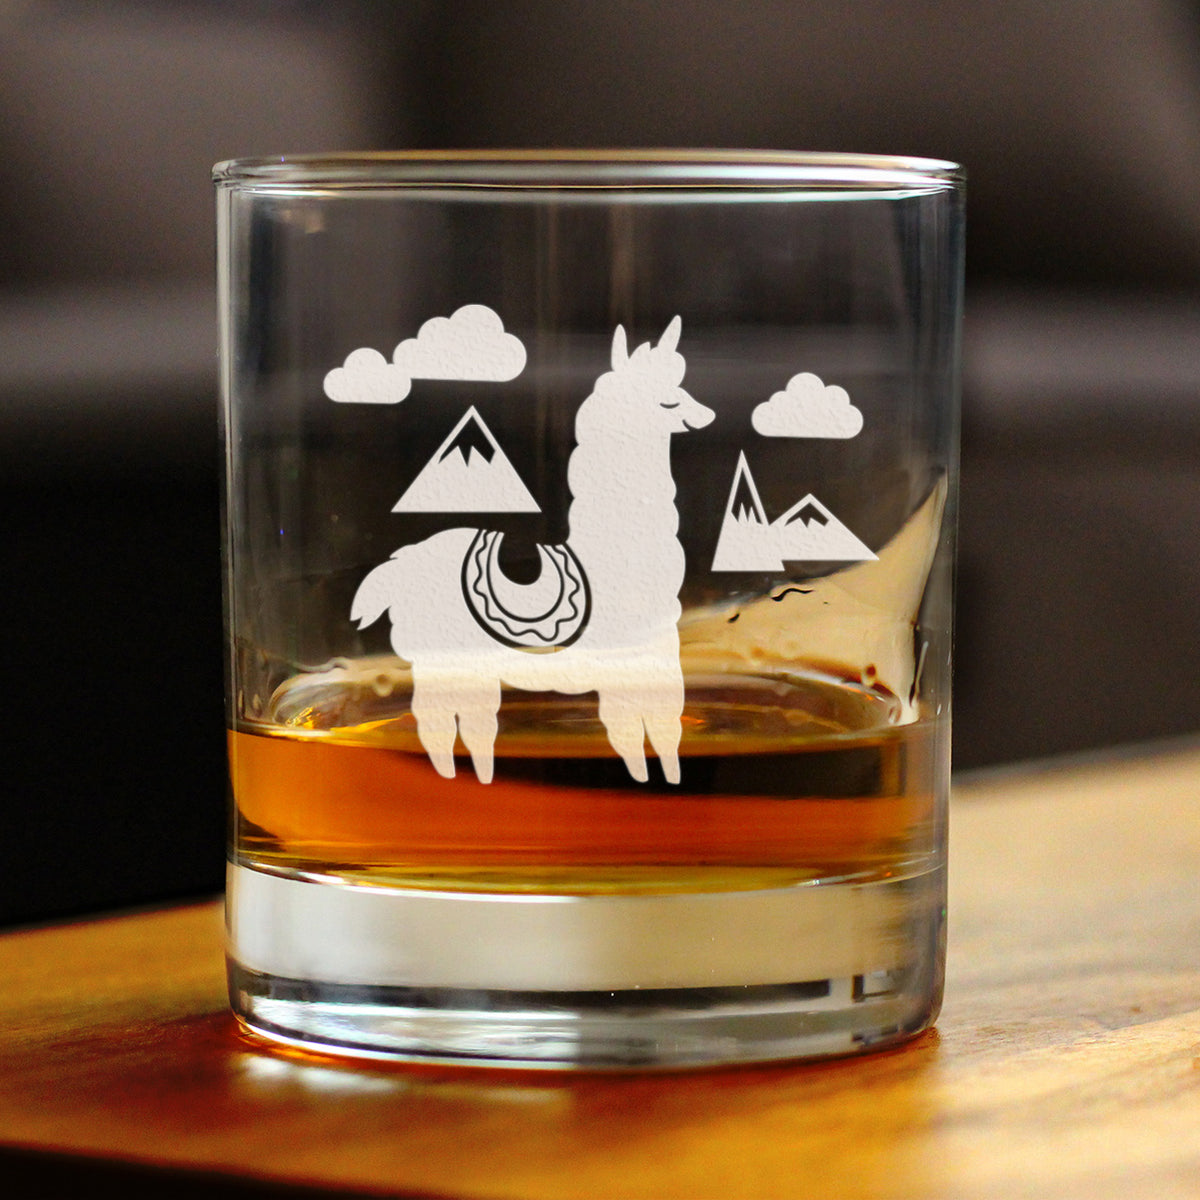 Alpaca Whiskey Rocks Glass - Unique Funny Farm Animal Themed Decor and Gifts for Alpaca Lovers - 10.25 Oz